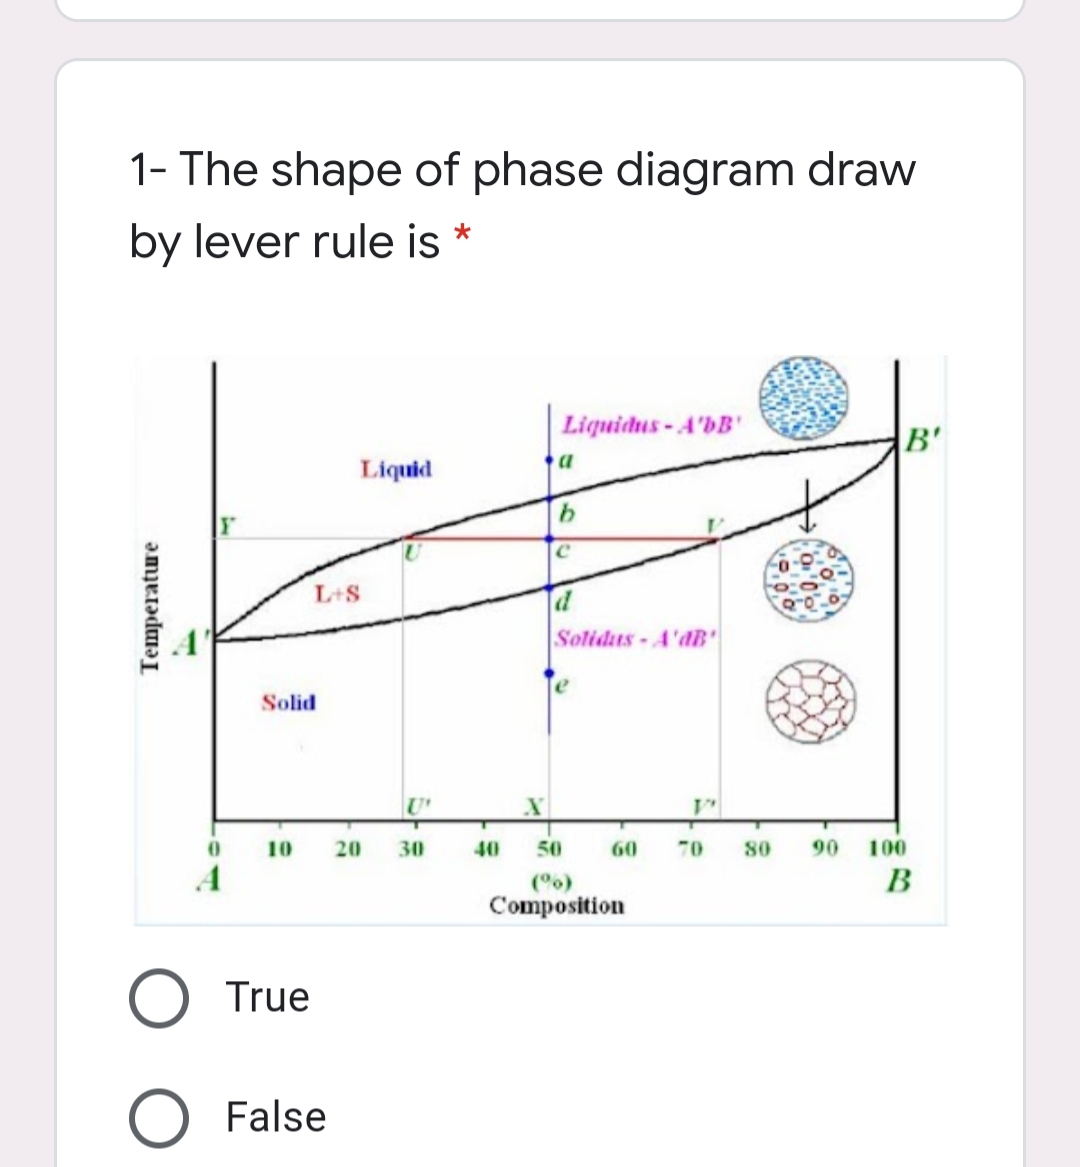 1- The shape of phase diagram draw
by lever rule is *
Liquidus-A'bB'
Liquid
L+S
Solidus-A'dB'
Solid
10
20
30
40
50
60
70
80
90
100
A
(°o)
В
Composition
True
False
Temperature
